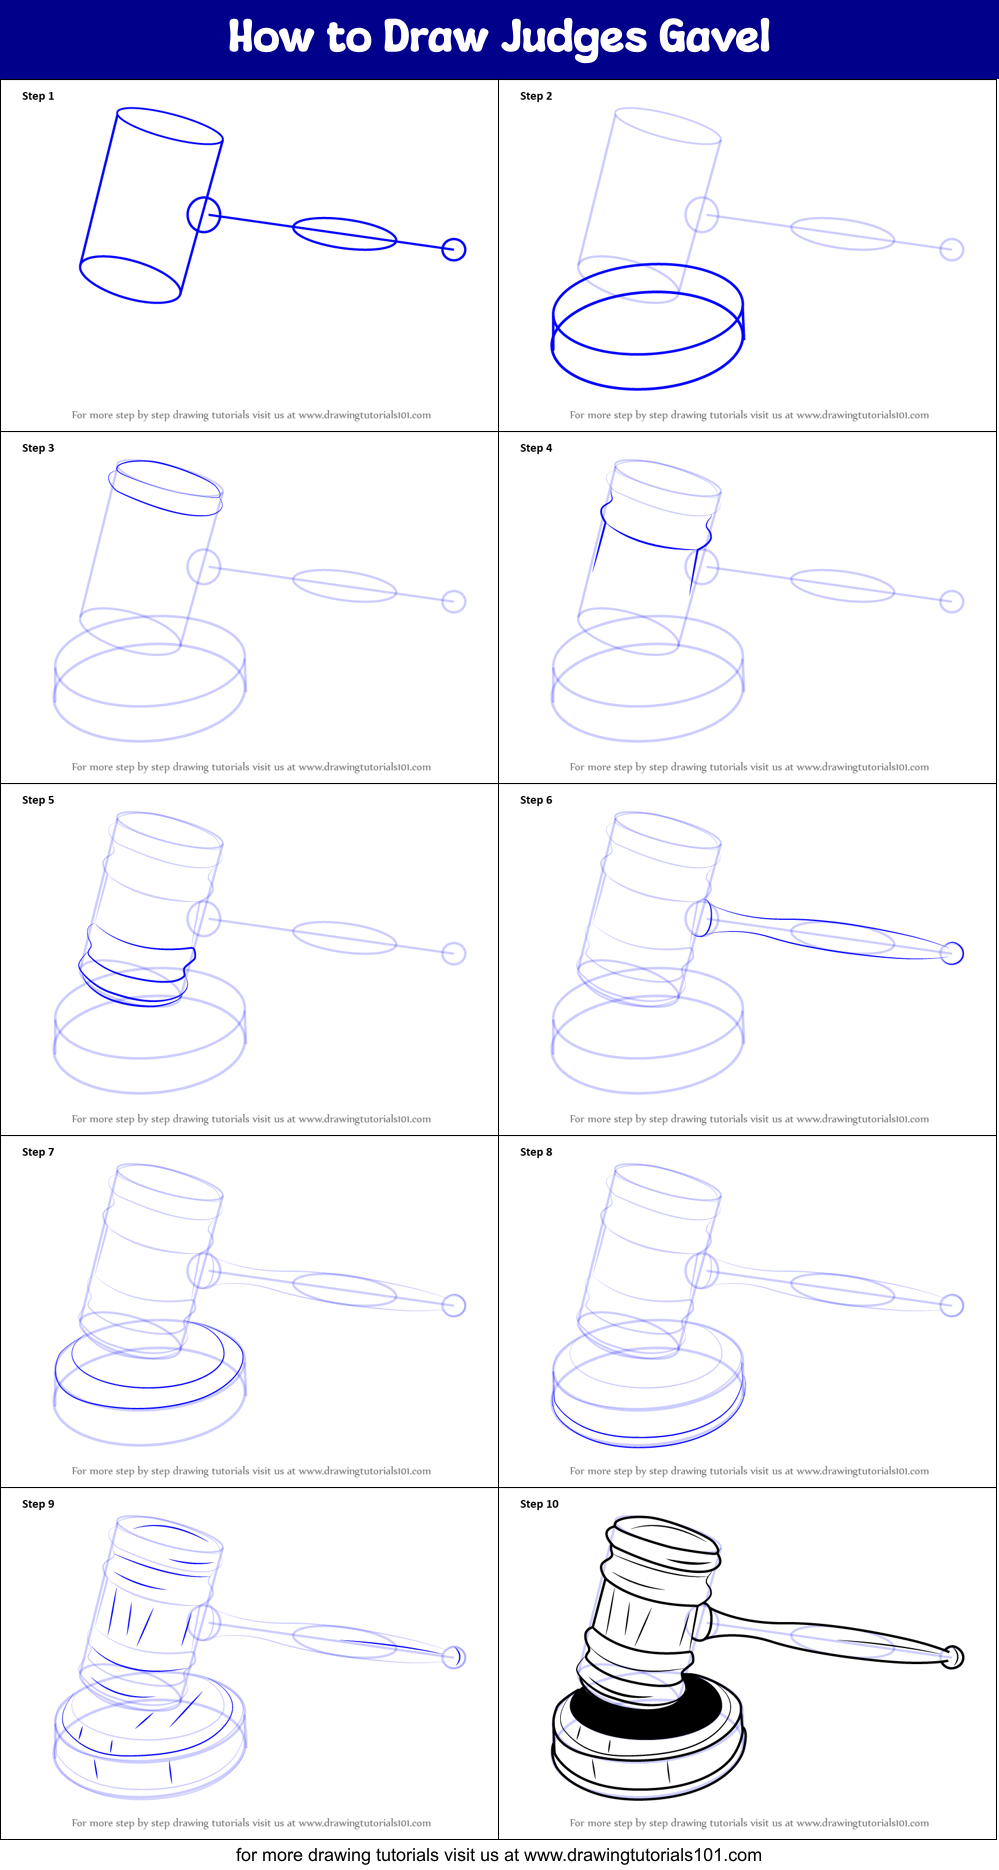 How to Draw Judges Gavel printable step by step drawing sheet